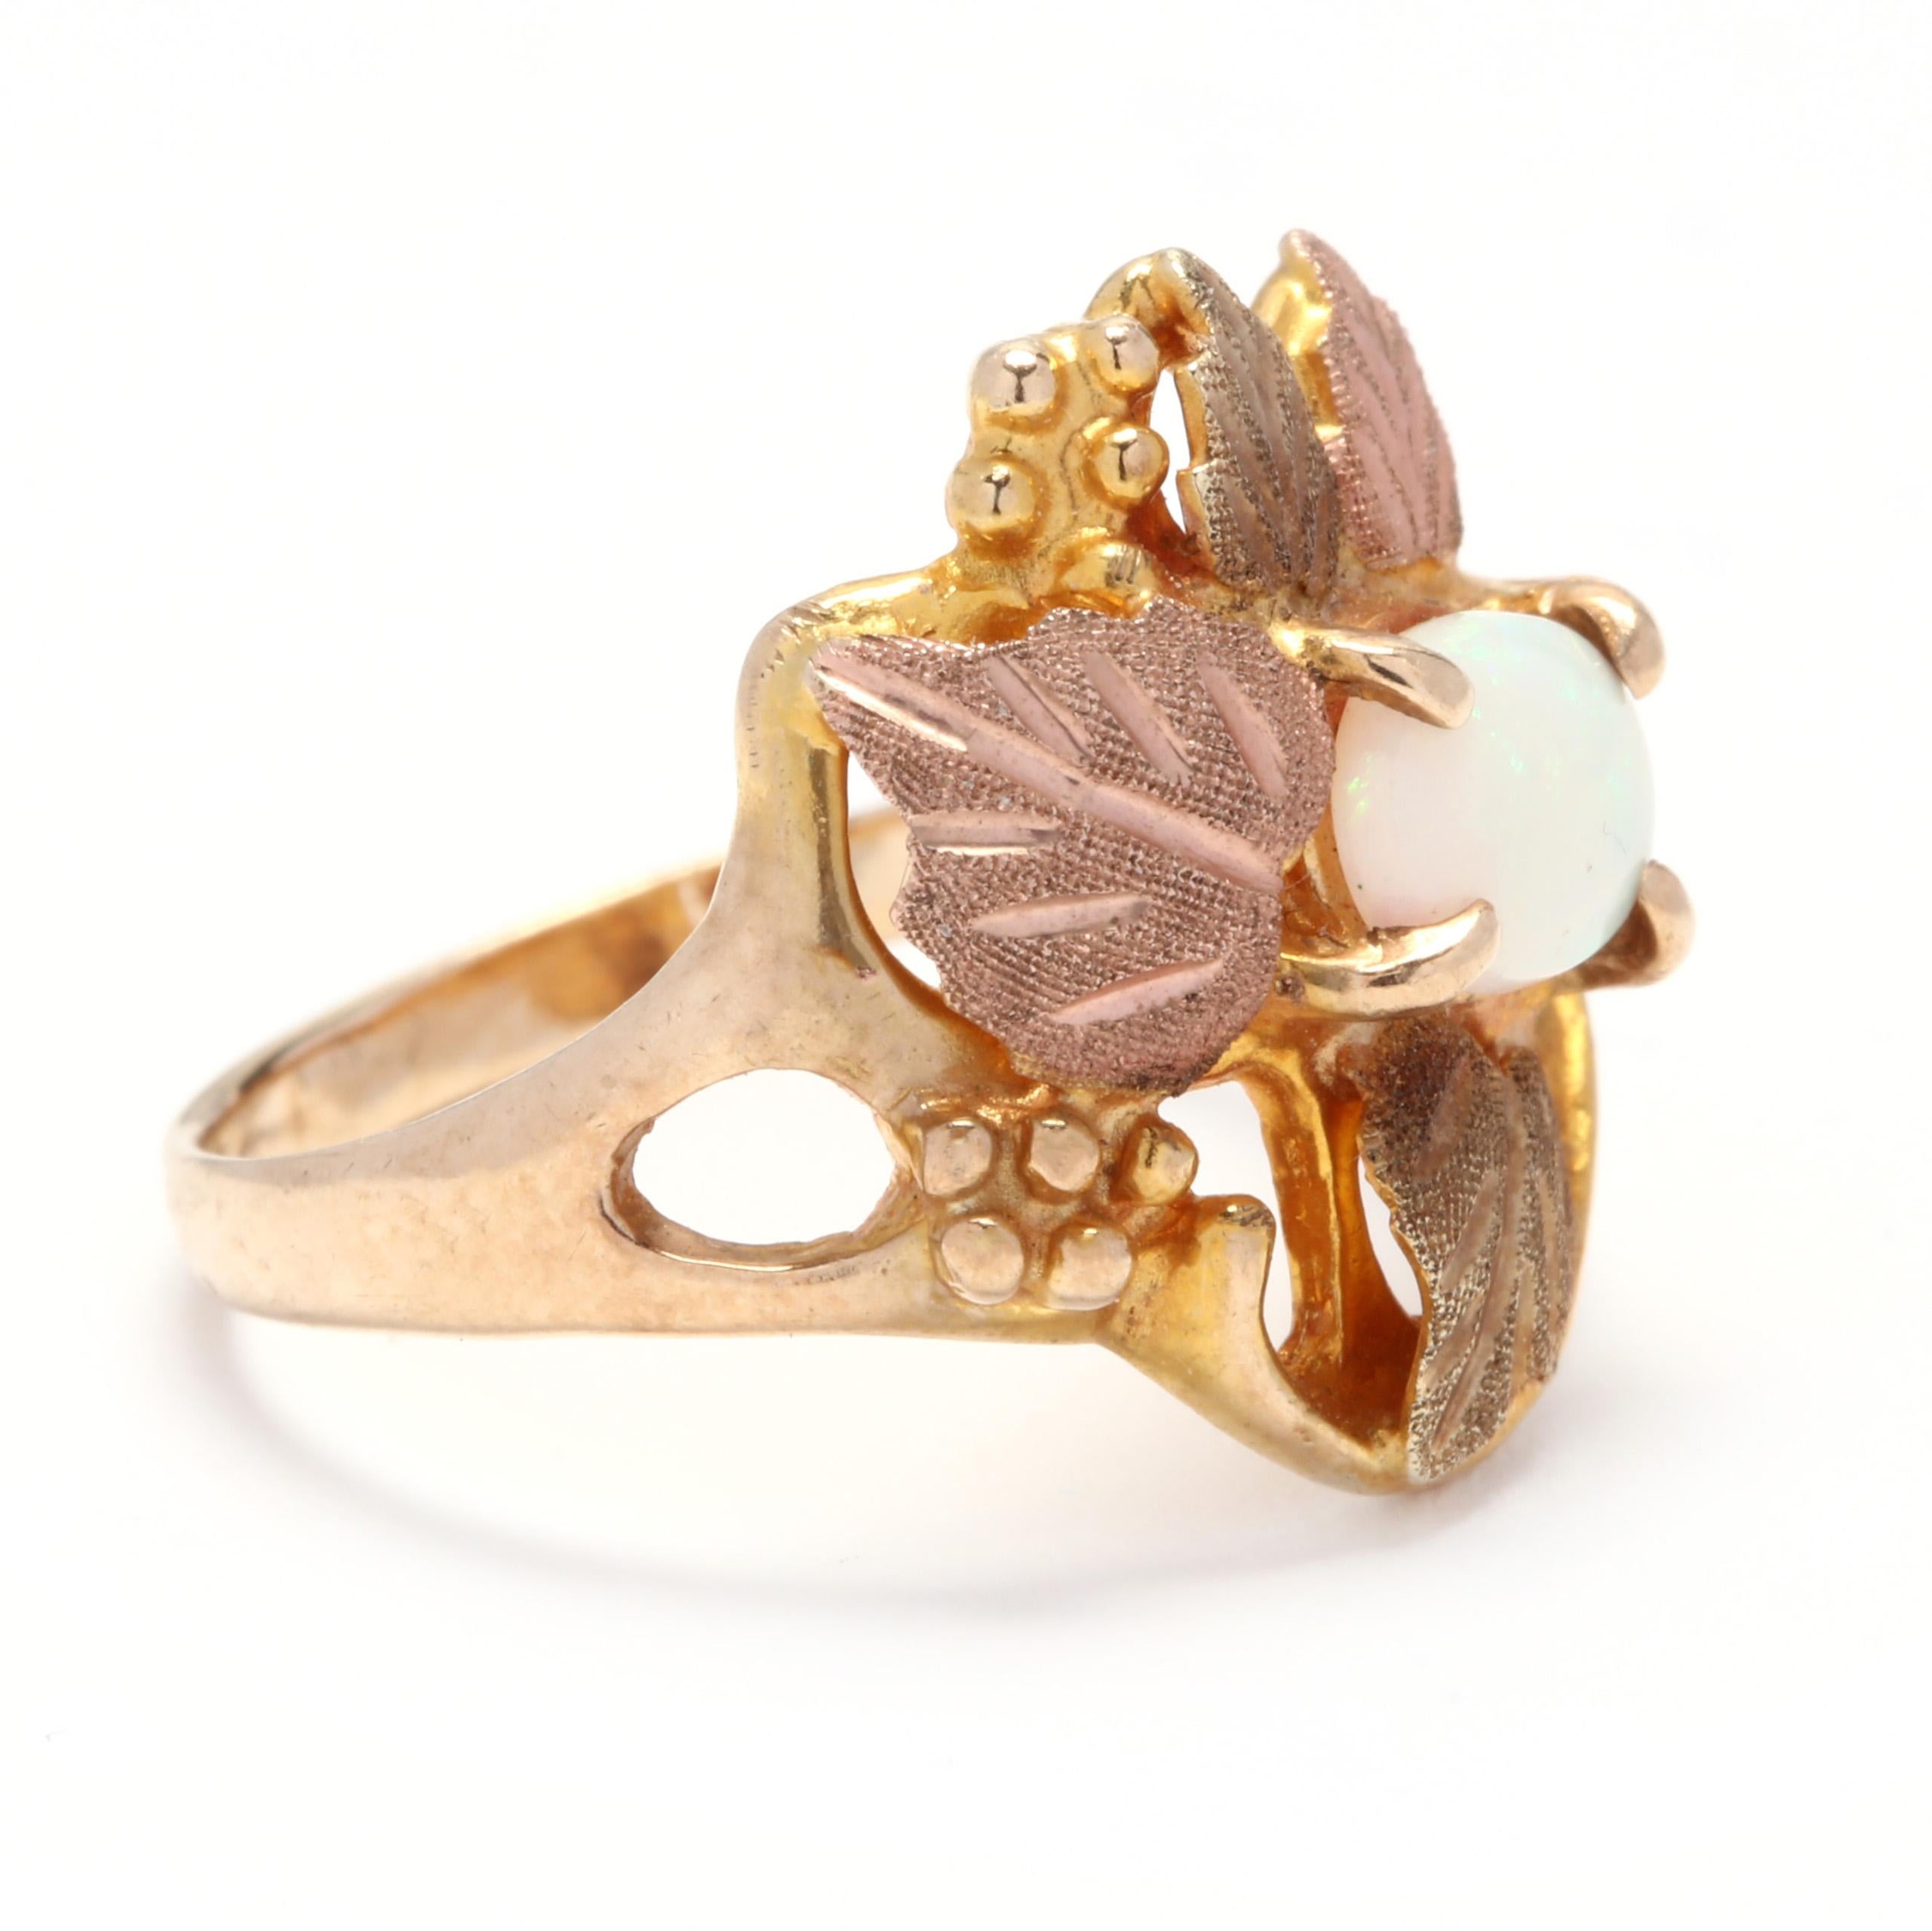 A vintage Black Hills 10 karat tricolor gold and opal leaf ring. A yellow gold ring with a cluster green and rose gold leaf motifs and a prong set, oval cabochon opal. 

Stones:
- opal, 1 stone
- oval cabochon
- 7.15 x 5.15 mm
- approximately .50